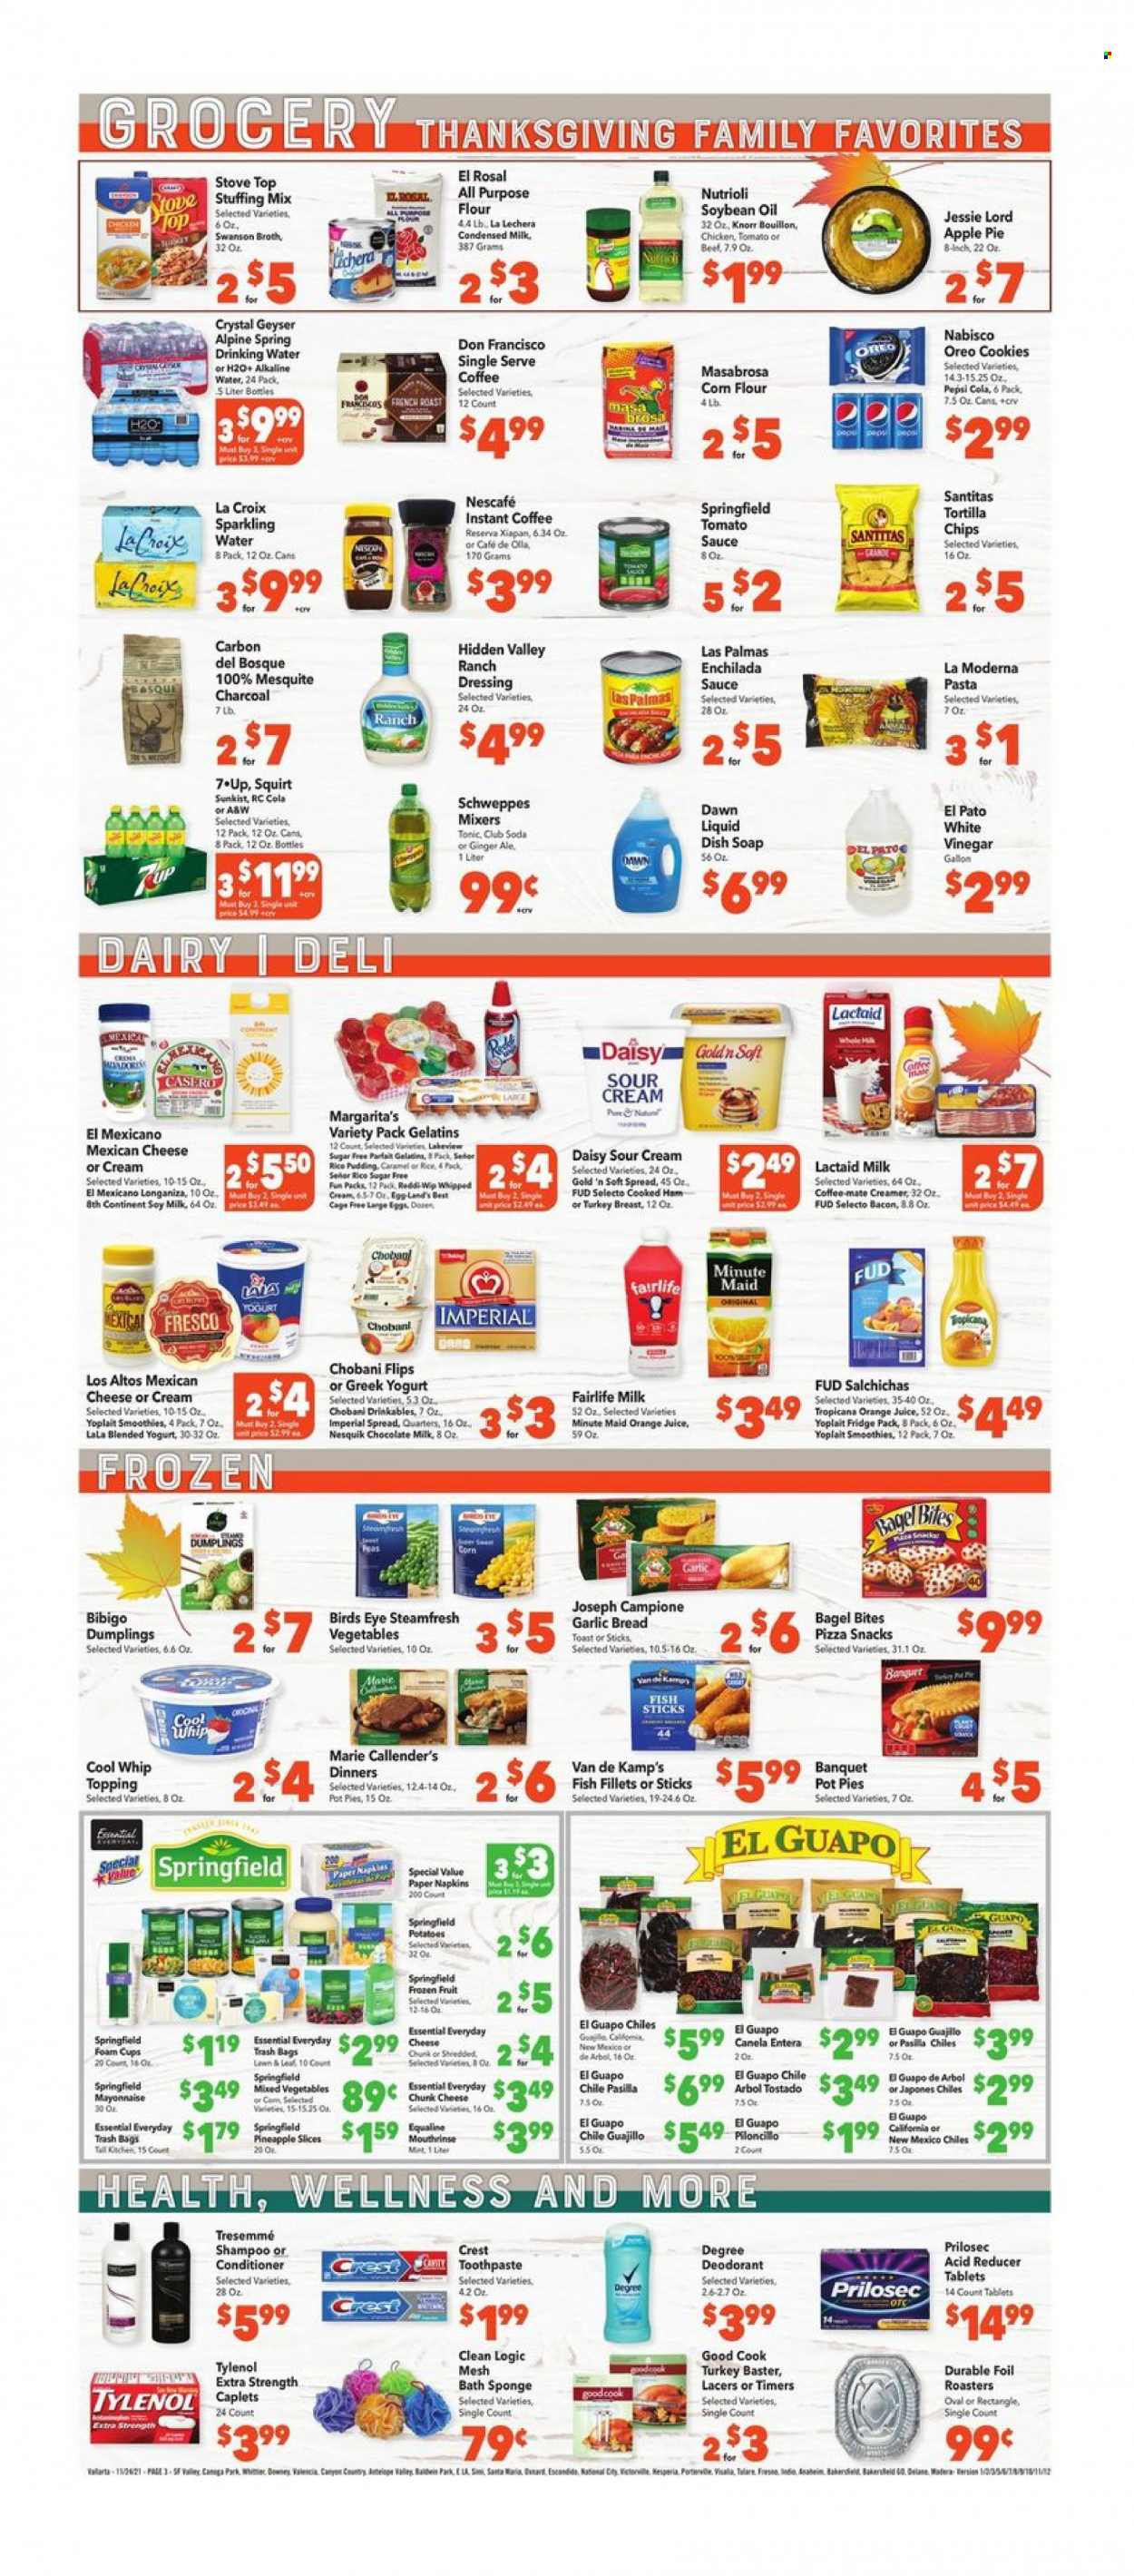 thumbnail - Vallarta Flyer - 11/24/2021 - 11/30/2021 - Sales products - bagels, bread, tortillas, pie, apple pie, pot pie, corn, potatoes, peas, pineapple, turkey breast, fish fillets, fish, fish fingers, Van de Kamp's, fish sticks, pizza, pasta, Knorr, sauce, dumplings, Bird's Eye, Marie Callender's, bacon, ham, Lactaid, chunk cheese, greek yoghurt, Oreo, yoghurt, Nesquik, Yoplait, Chobani, rice pudding, Coffee-Mate, soy milk, condensed milk, eggs, cage free eggs, Cool Whip, sour cream, whipped cream, creamer, mayonnaise, mixed vegetables, cookies, milk chocolate, chocolate, snack, all purpose flour, bouillon, stuffing mix, topping, broth, enchilada sauce, dressing, soya oil, oil, ginger ale, Schweppes, Pepsi, orange juice, juice, tonic, 7UP, fruit punch, smoothie, Club Soda, alkaline water, instant coffee, Nescafé, napkins, shampoo, soap, toothpaste, Crest, conditioner, TRESemmé, anti-perspirant, deodorant, Tylenol. Page 3.